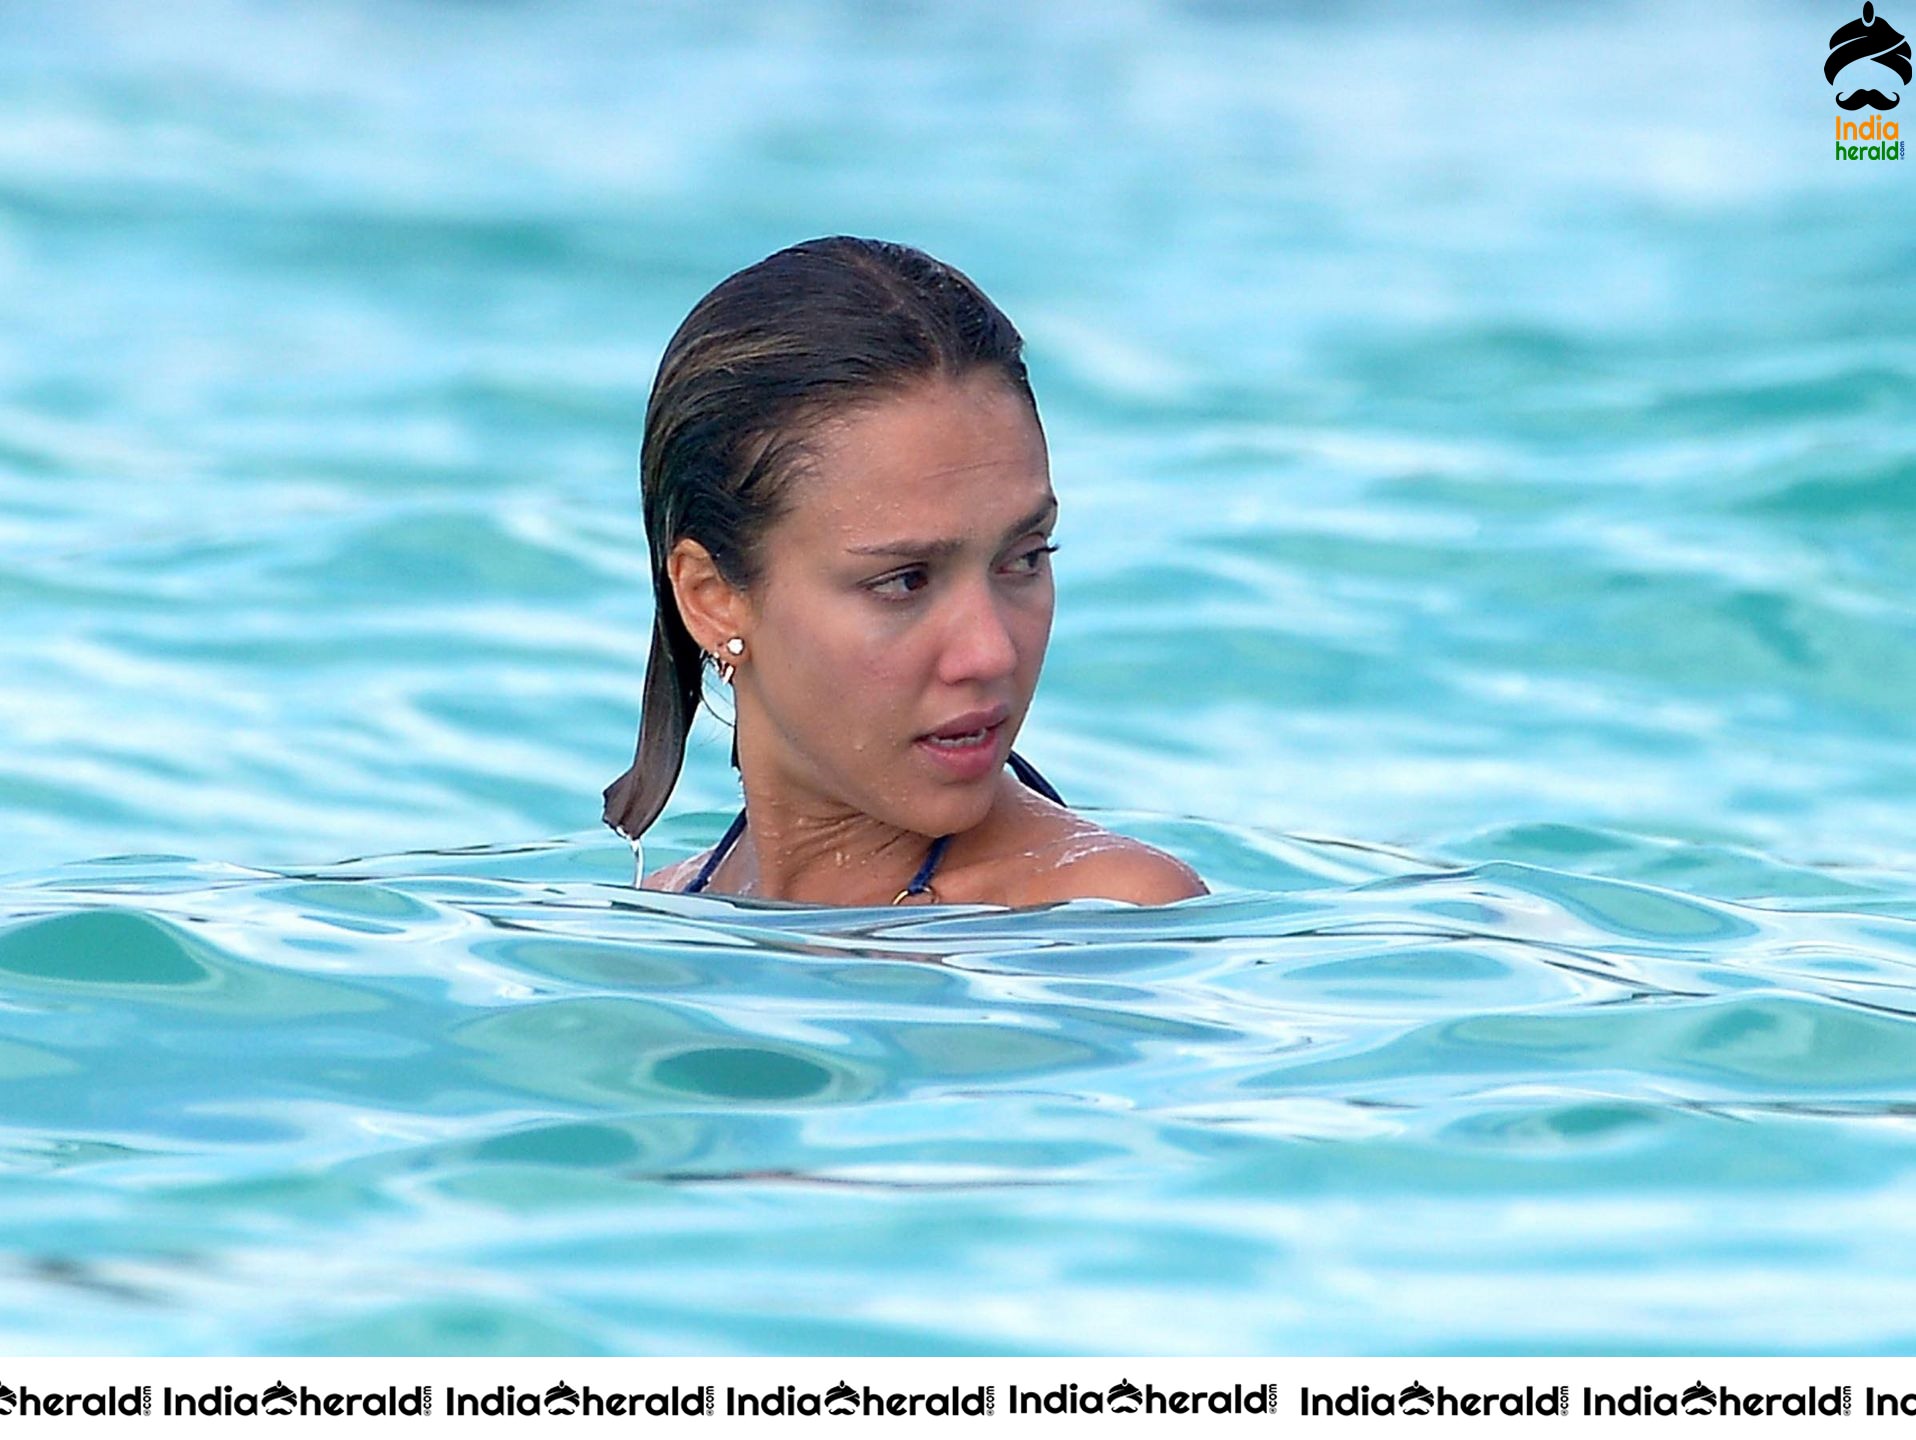 Jessica Alba Exposes her Juicy Body by wearing a bikini in the Caribbean Set 1